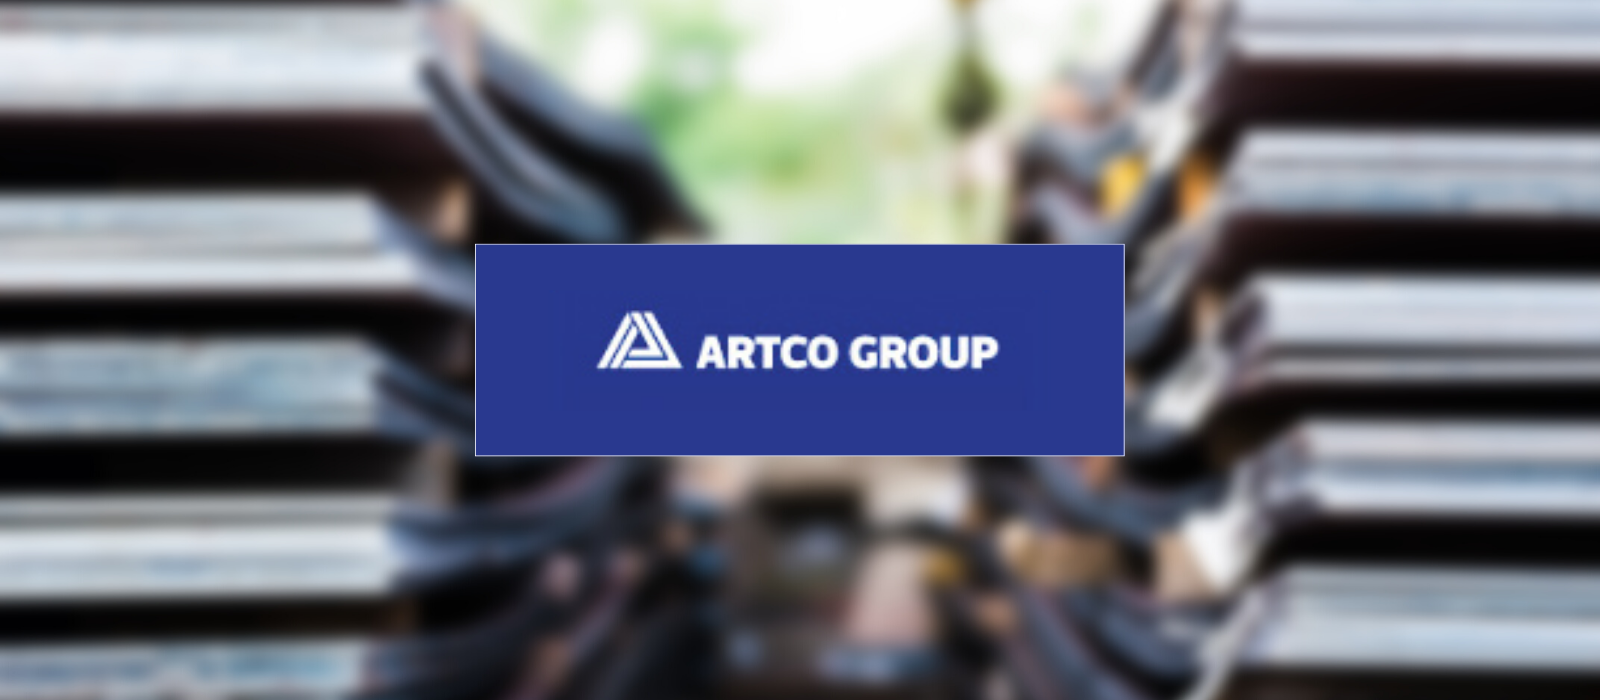 HGP to Manage Global Online Auction of Artco Group Heavy Plate Manufacturing Assets Beginning November 29